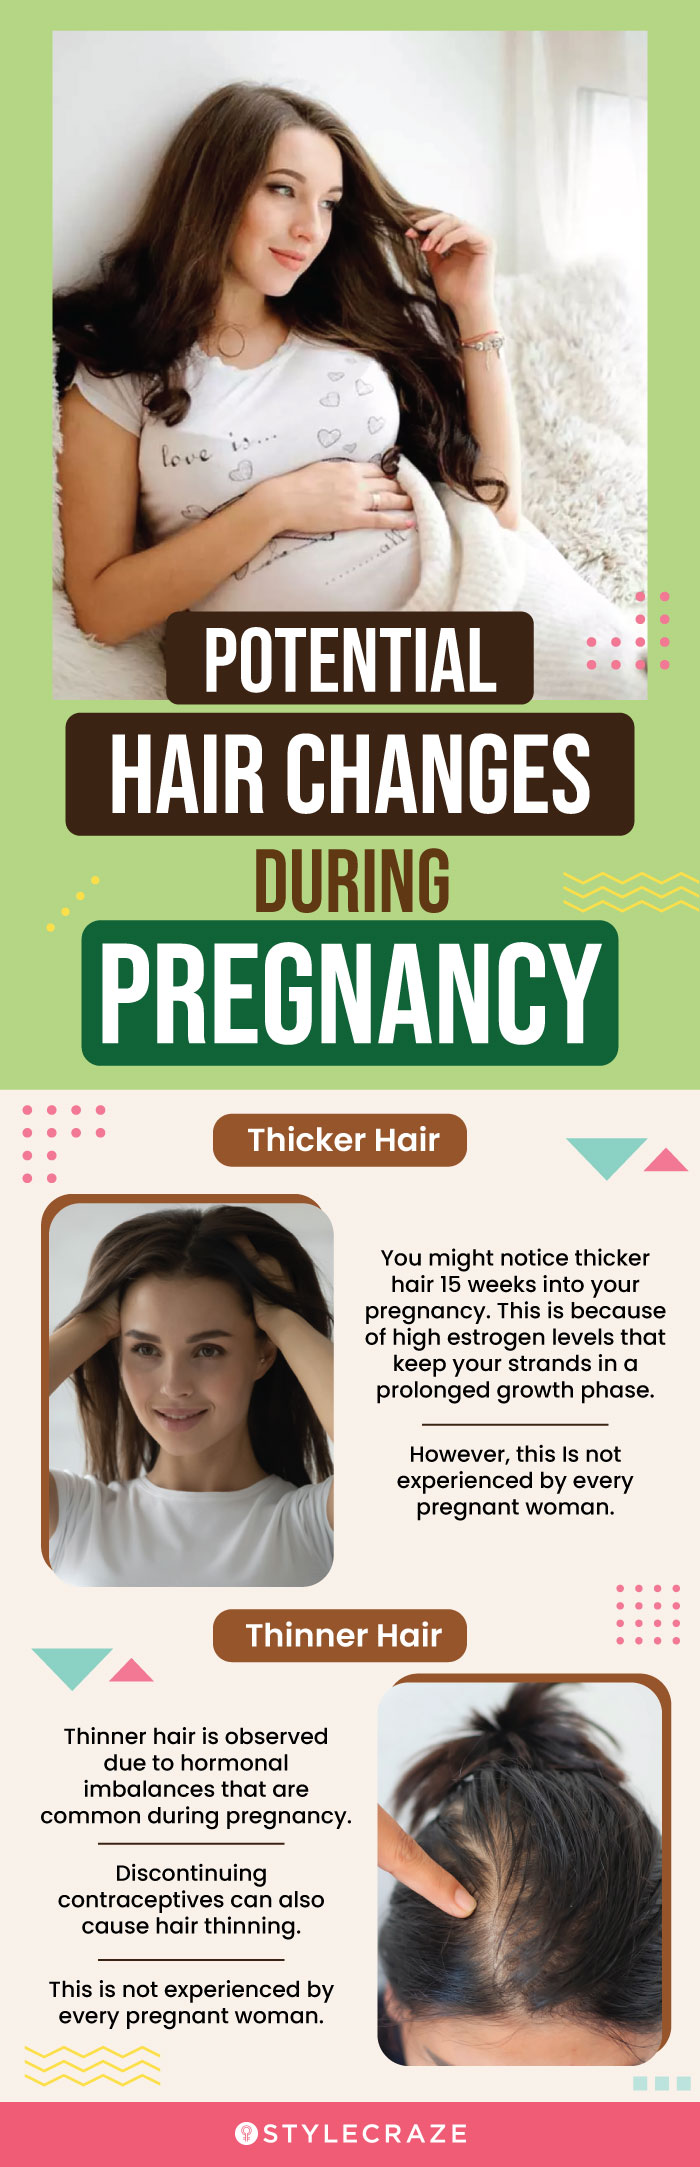 potential hair changes during pregnancy (infographic)